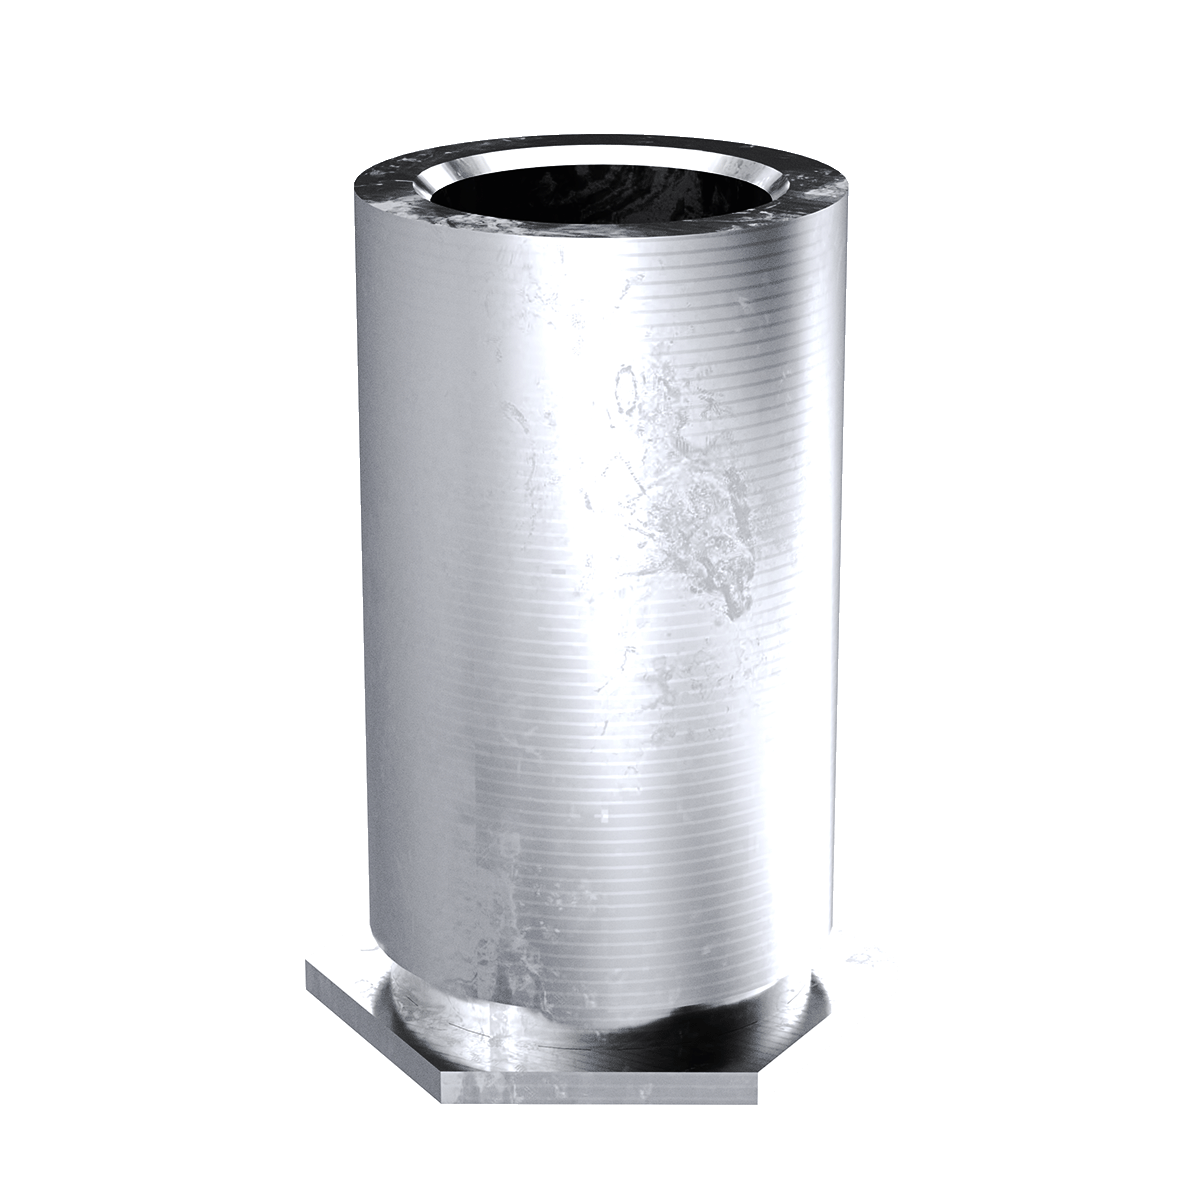 Self-Clinching Standoff, Through Unthreaded, 300 Series Stainless Steel, Passivated, 0.169 x 0.625, 100 Pack